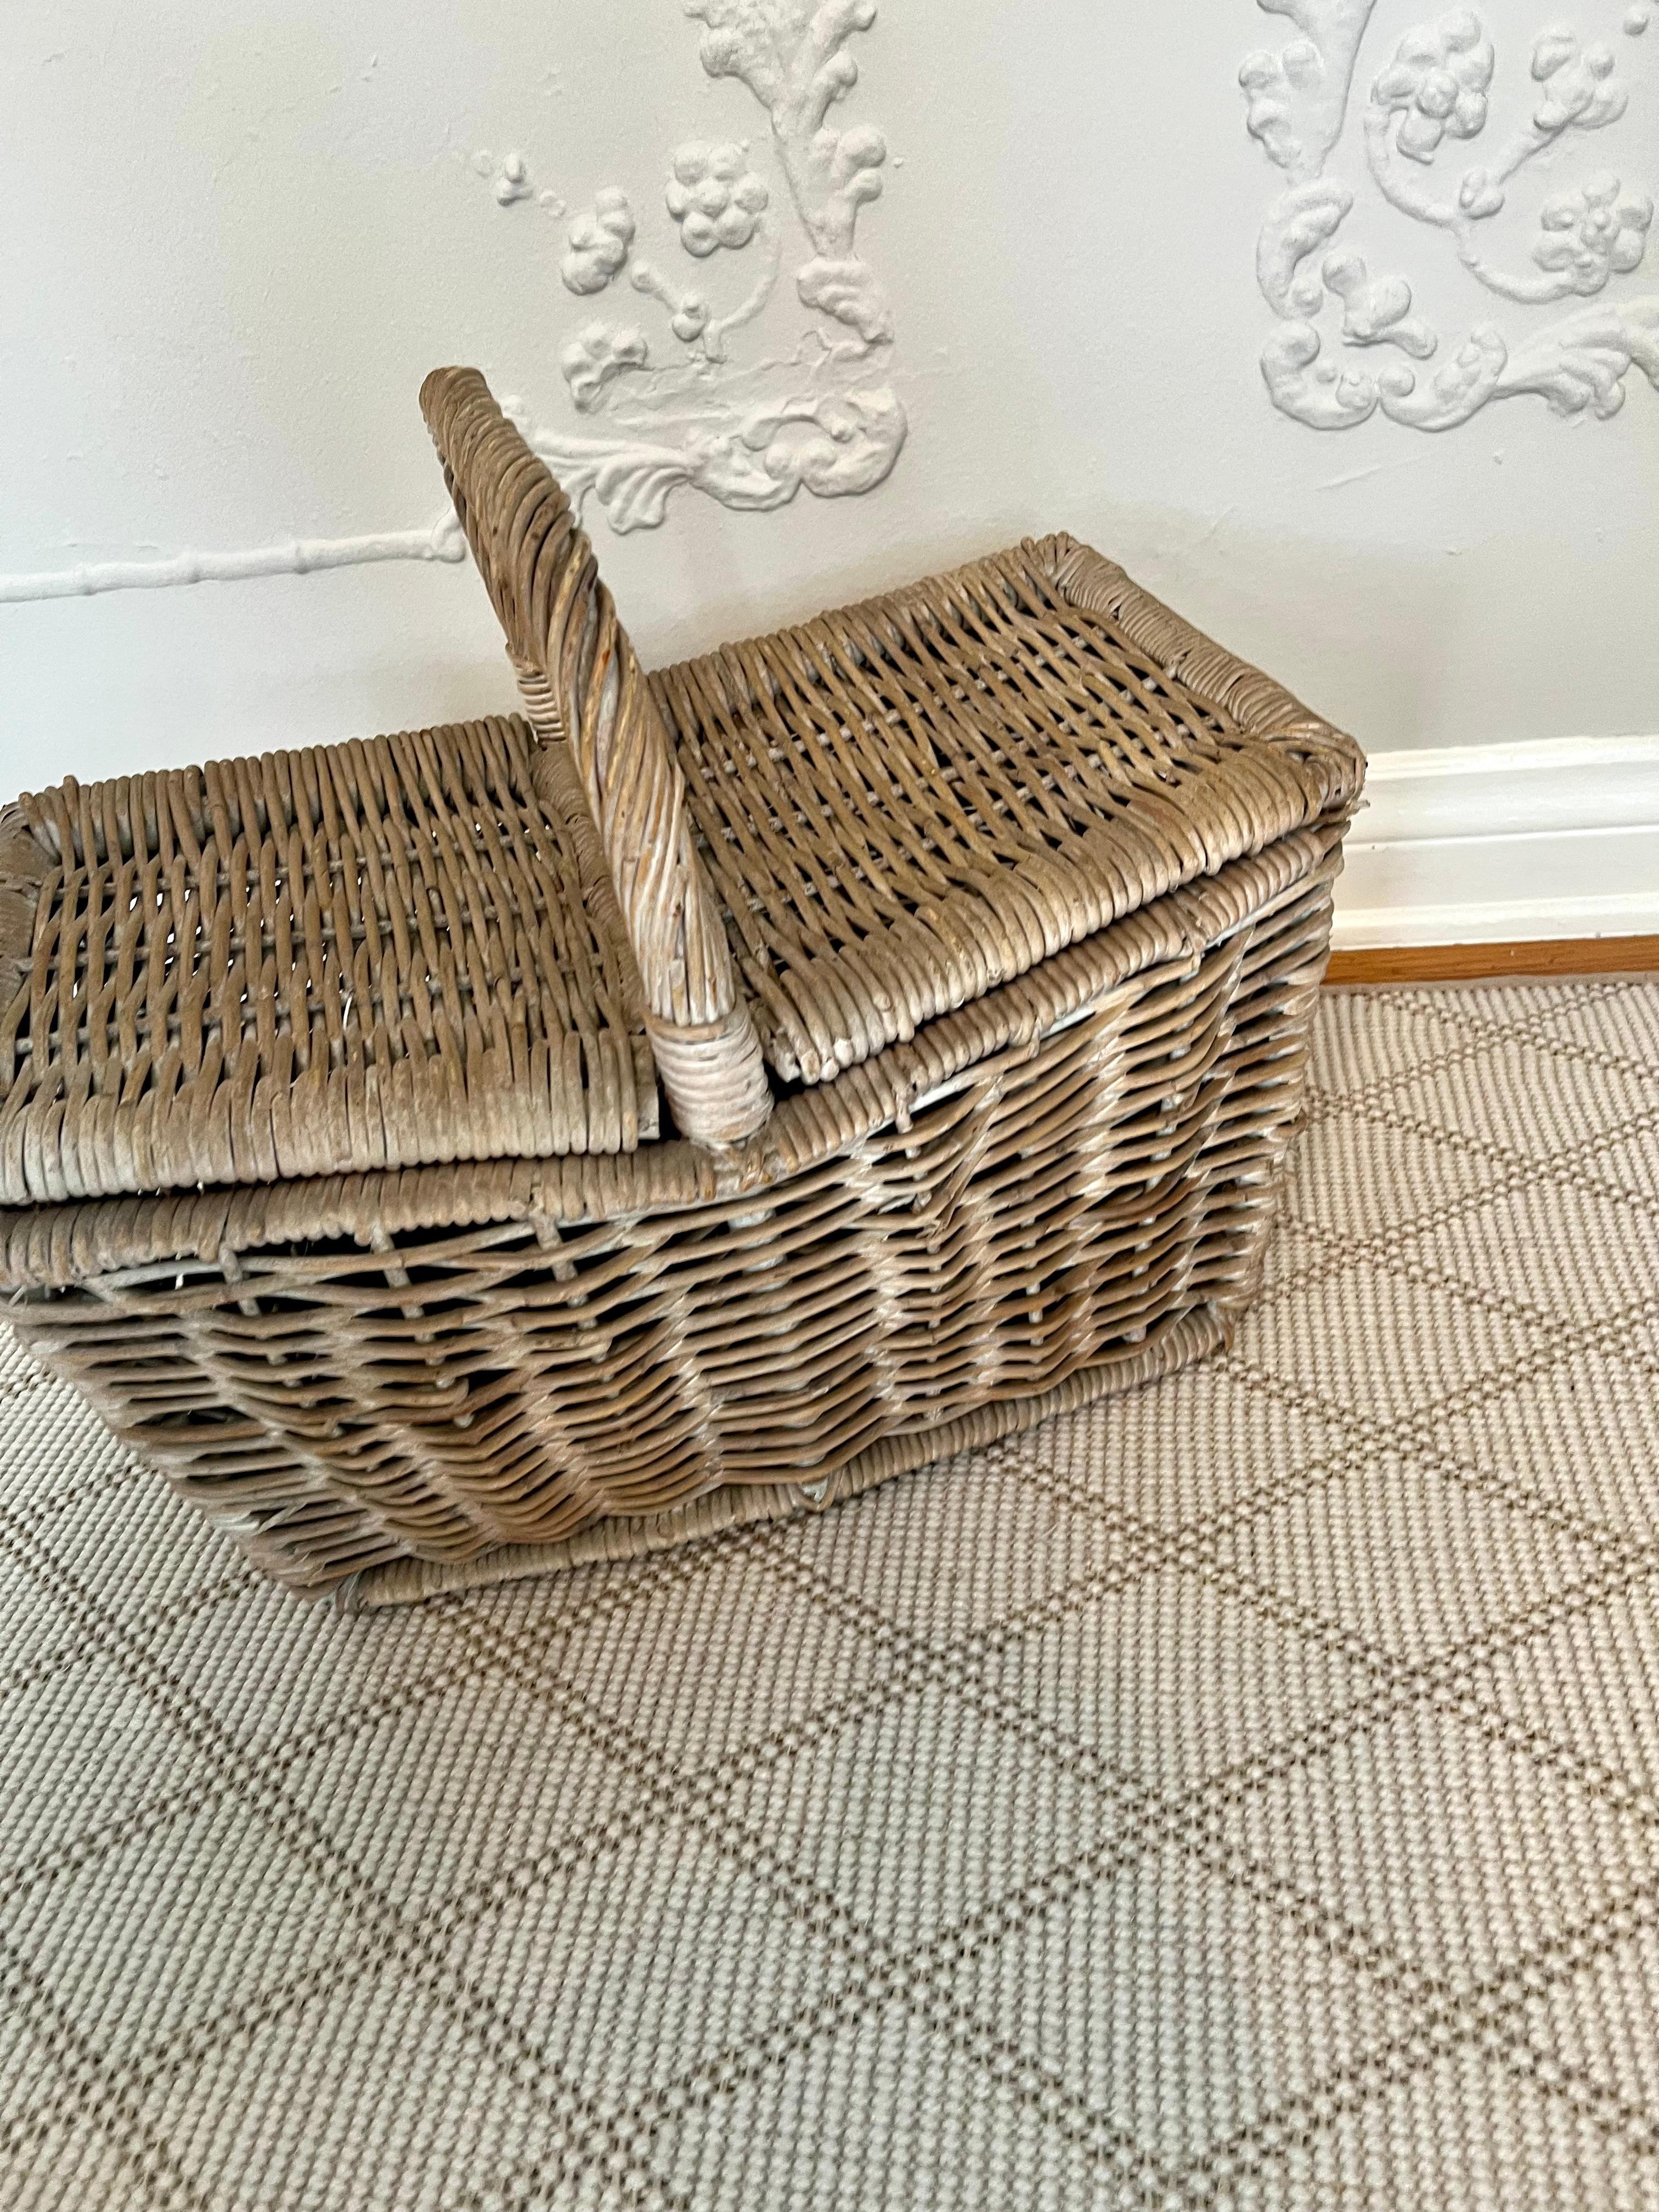 Woven Rattan Picnic Basket with Center Handle and Duo Opening Sides For Sale 3